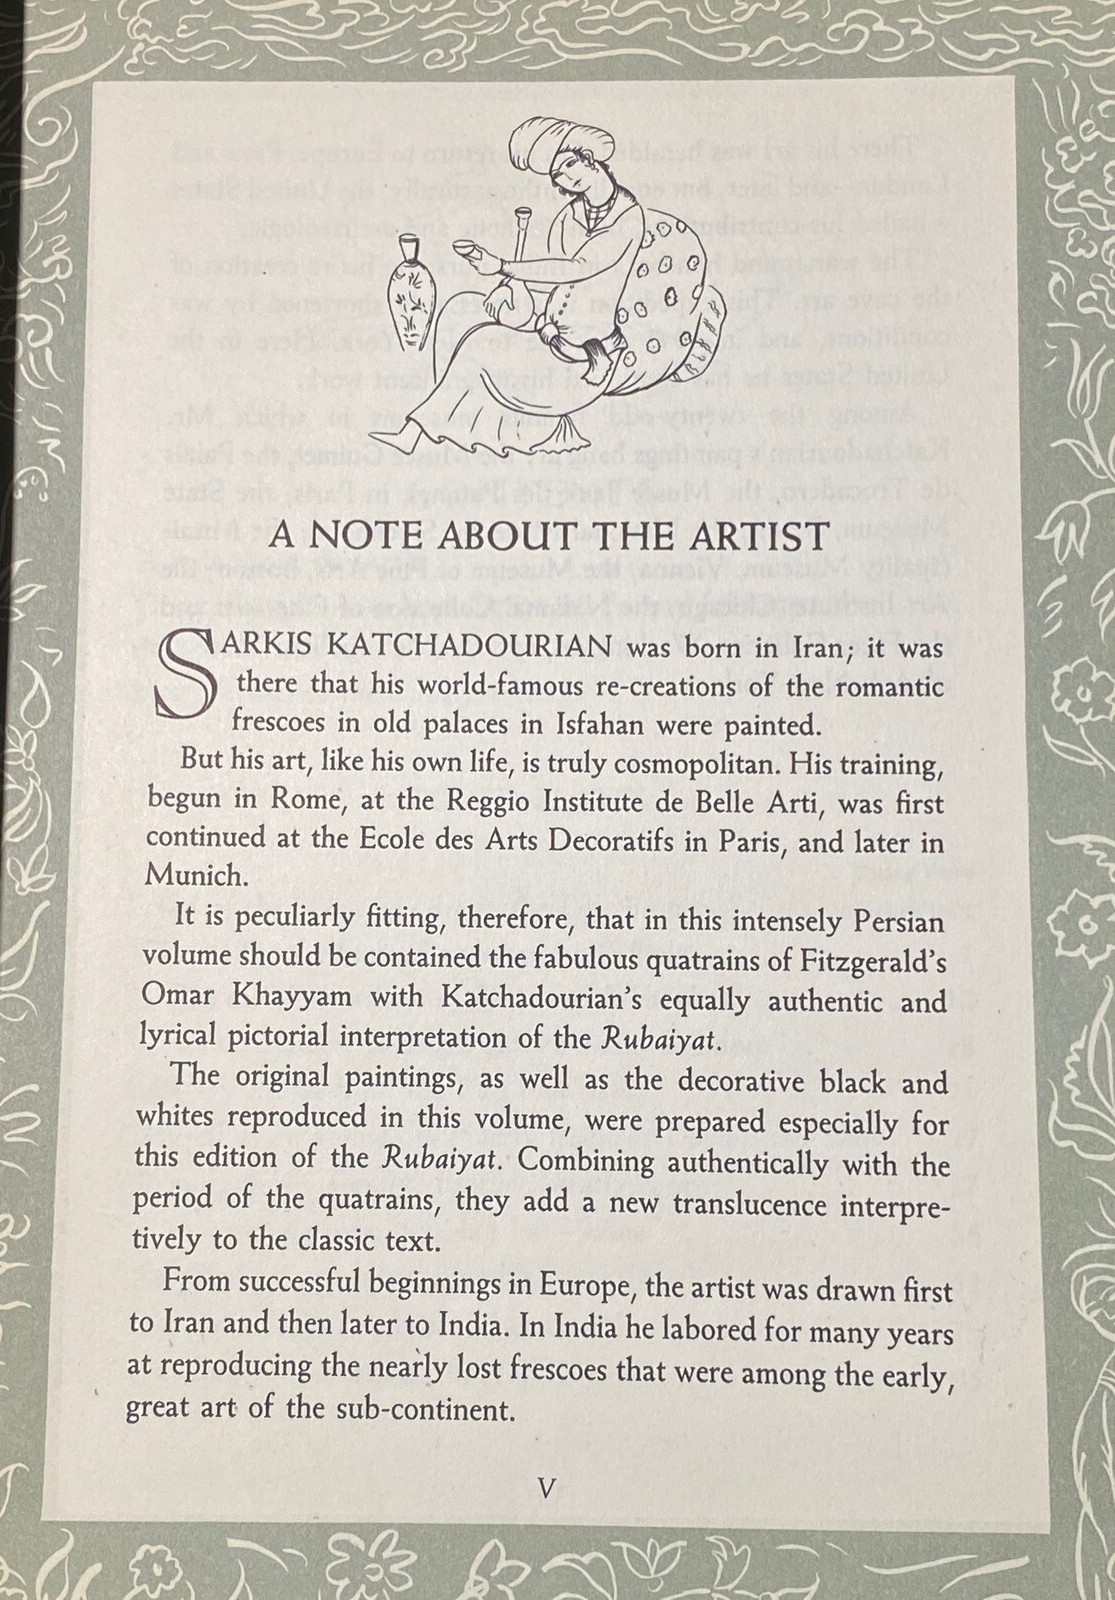 About the artist, page 1